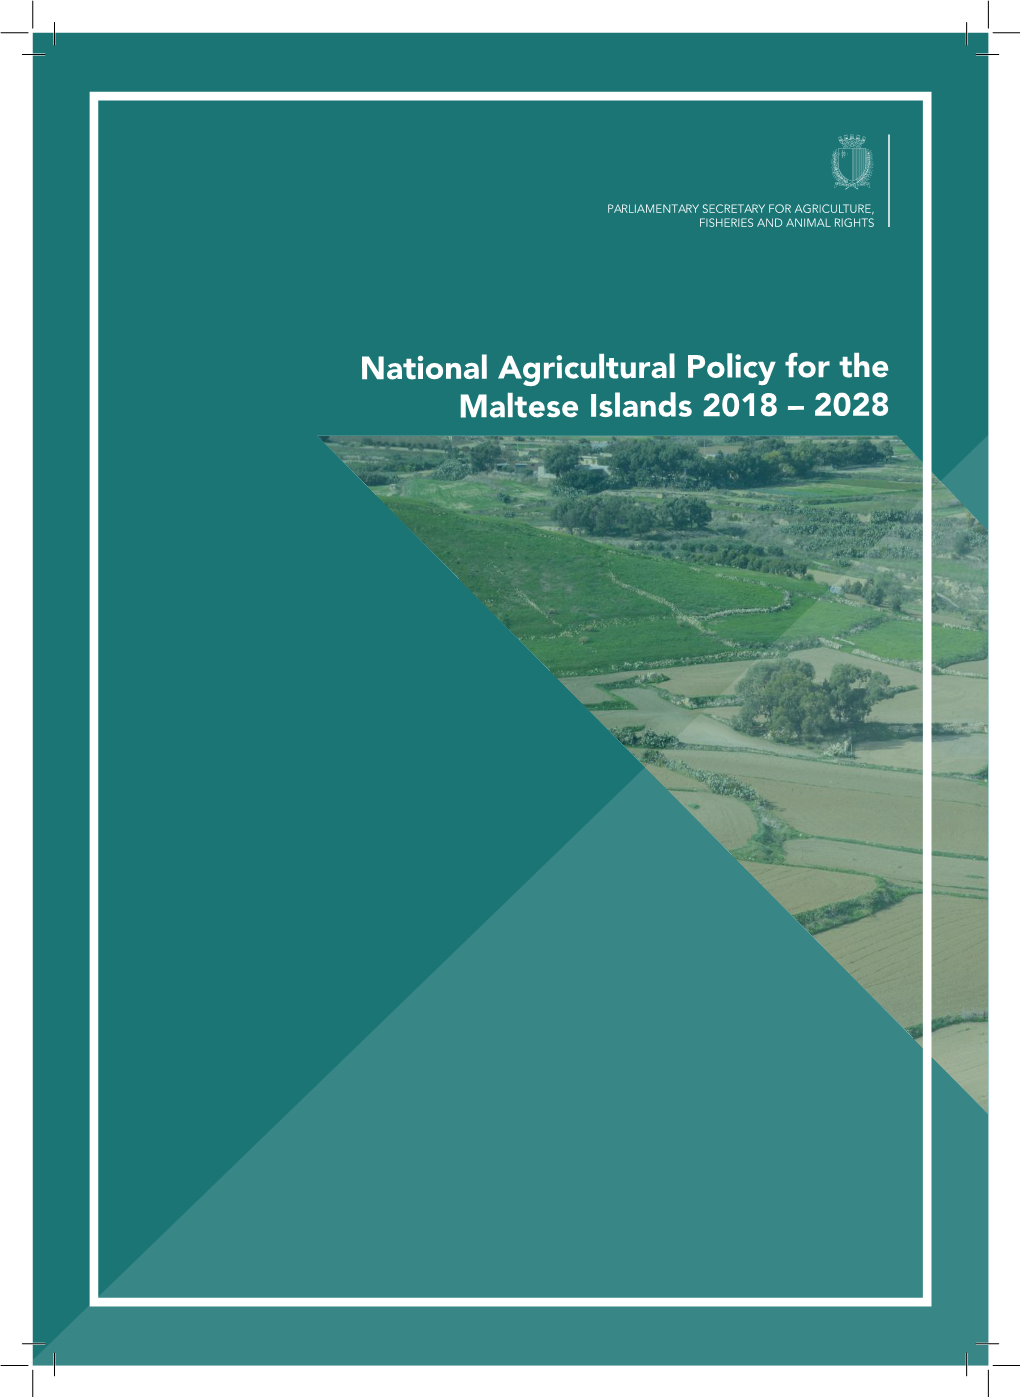 National Agricultural Policy for the Maltese Islands 2018 – 2028 PARLIAMENTARY SECRETARY for AGRICULTURE, FISHERIES and ANIMAL RIGHTS